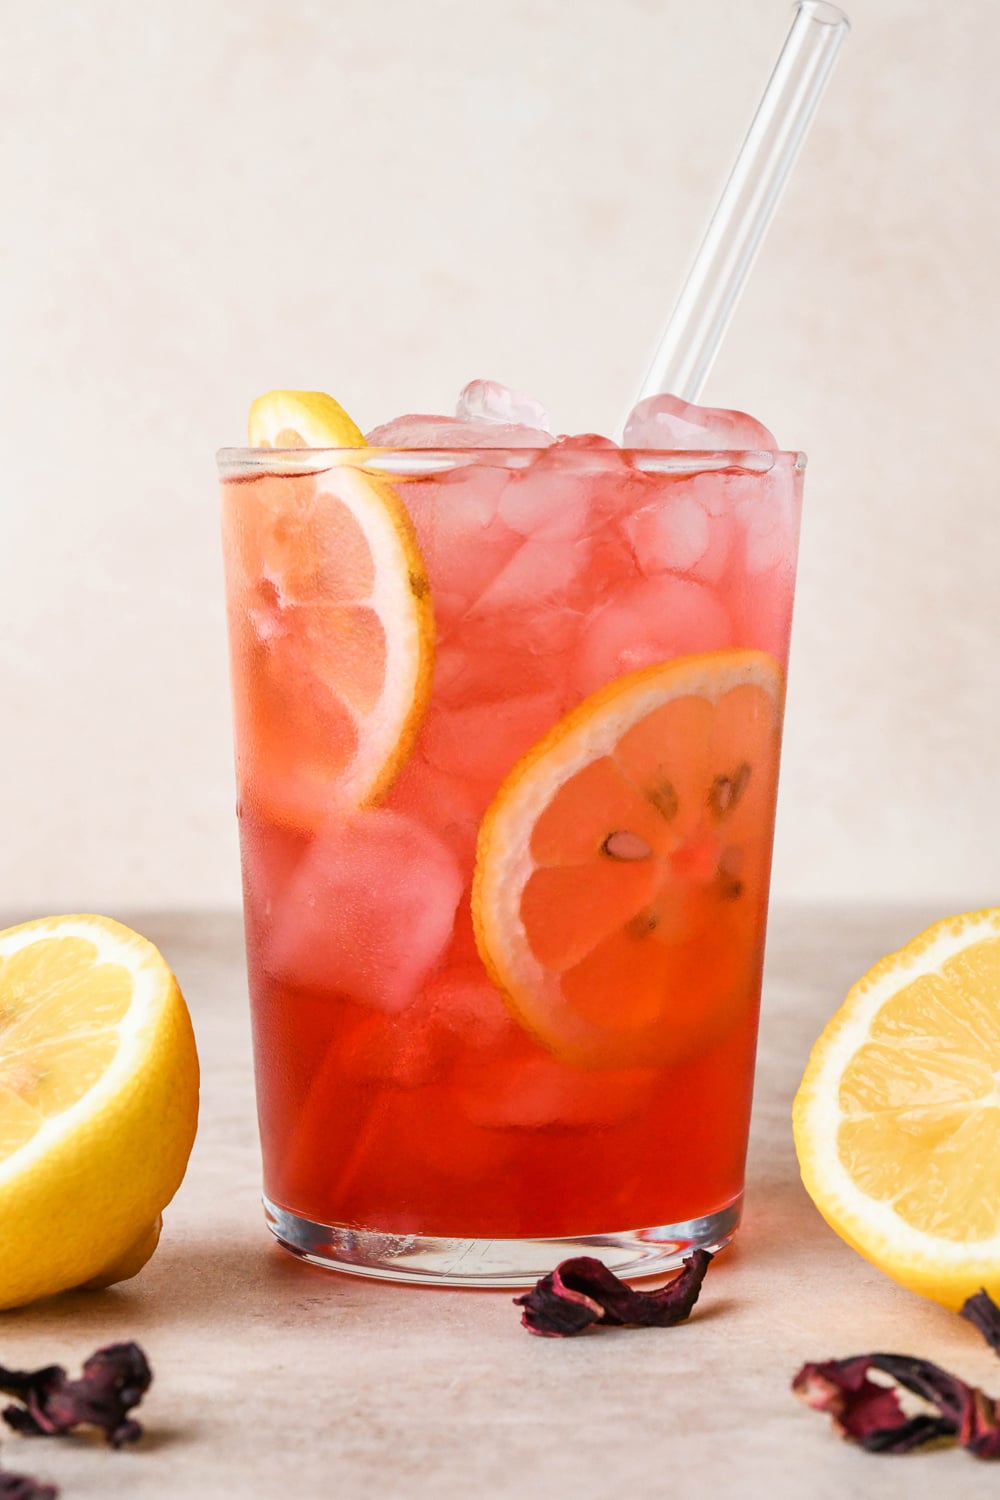 A straight on image of a single glass of hibiscus lemonade garnished with lemon wheels, surrounded by a few scattered dried hibiscus flowers and cut lemons.